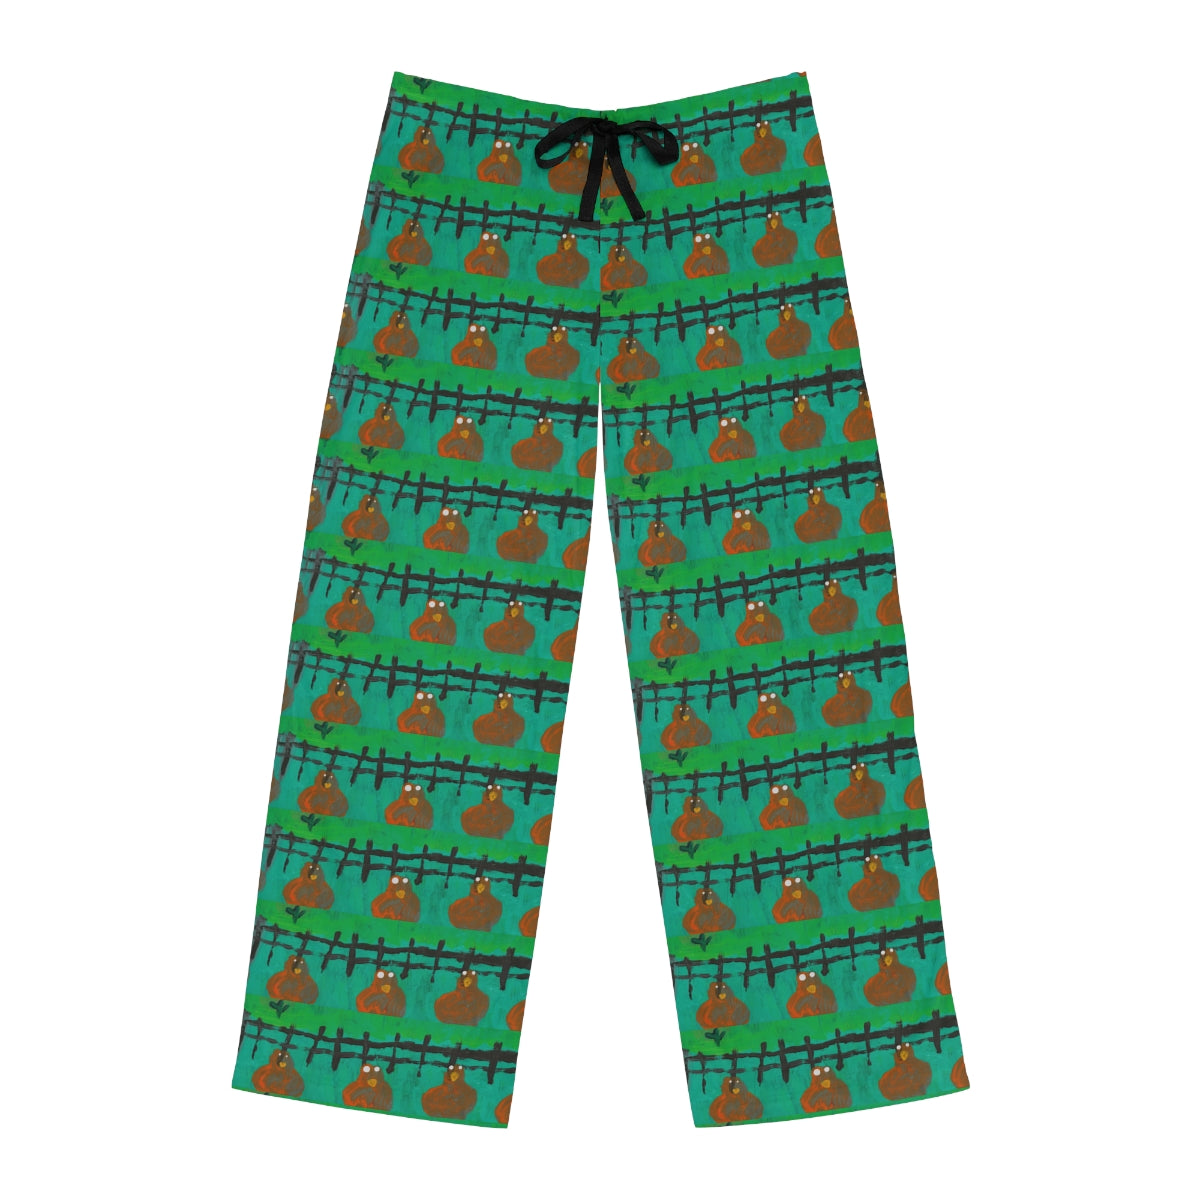 pants with painting of chickens repeated